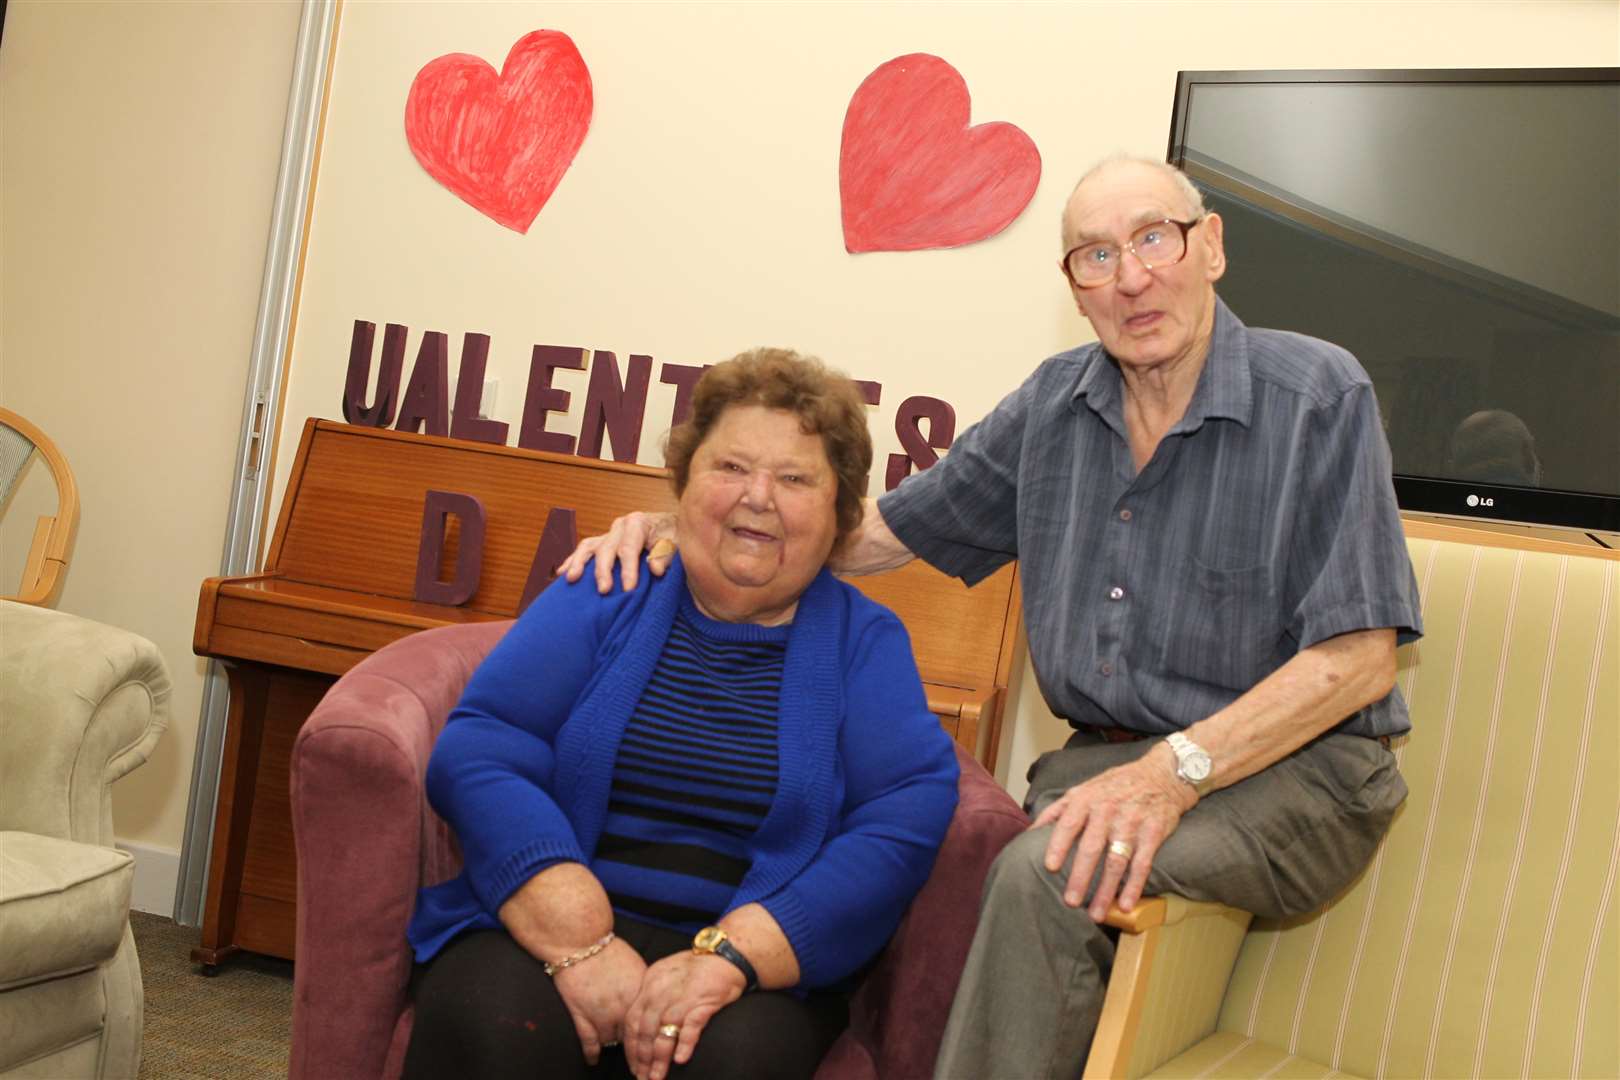 Ted and Gloria in the space where they were hitched at Watling Court care home